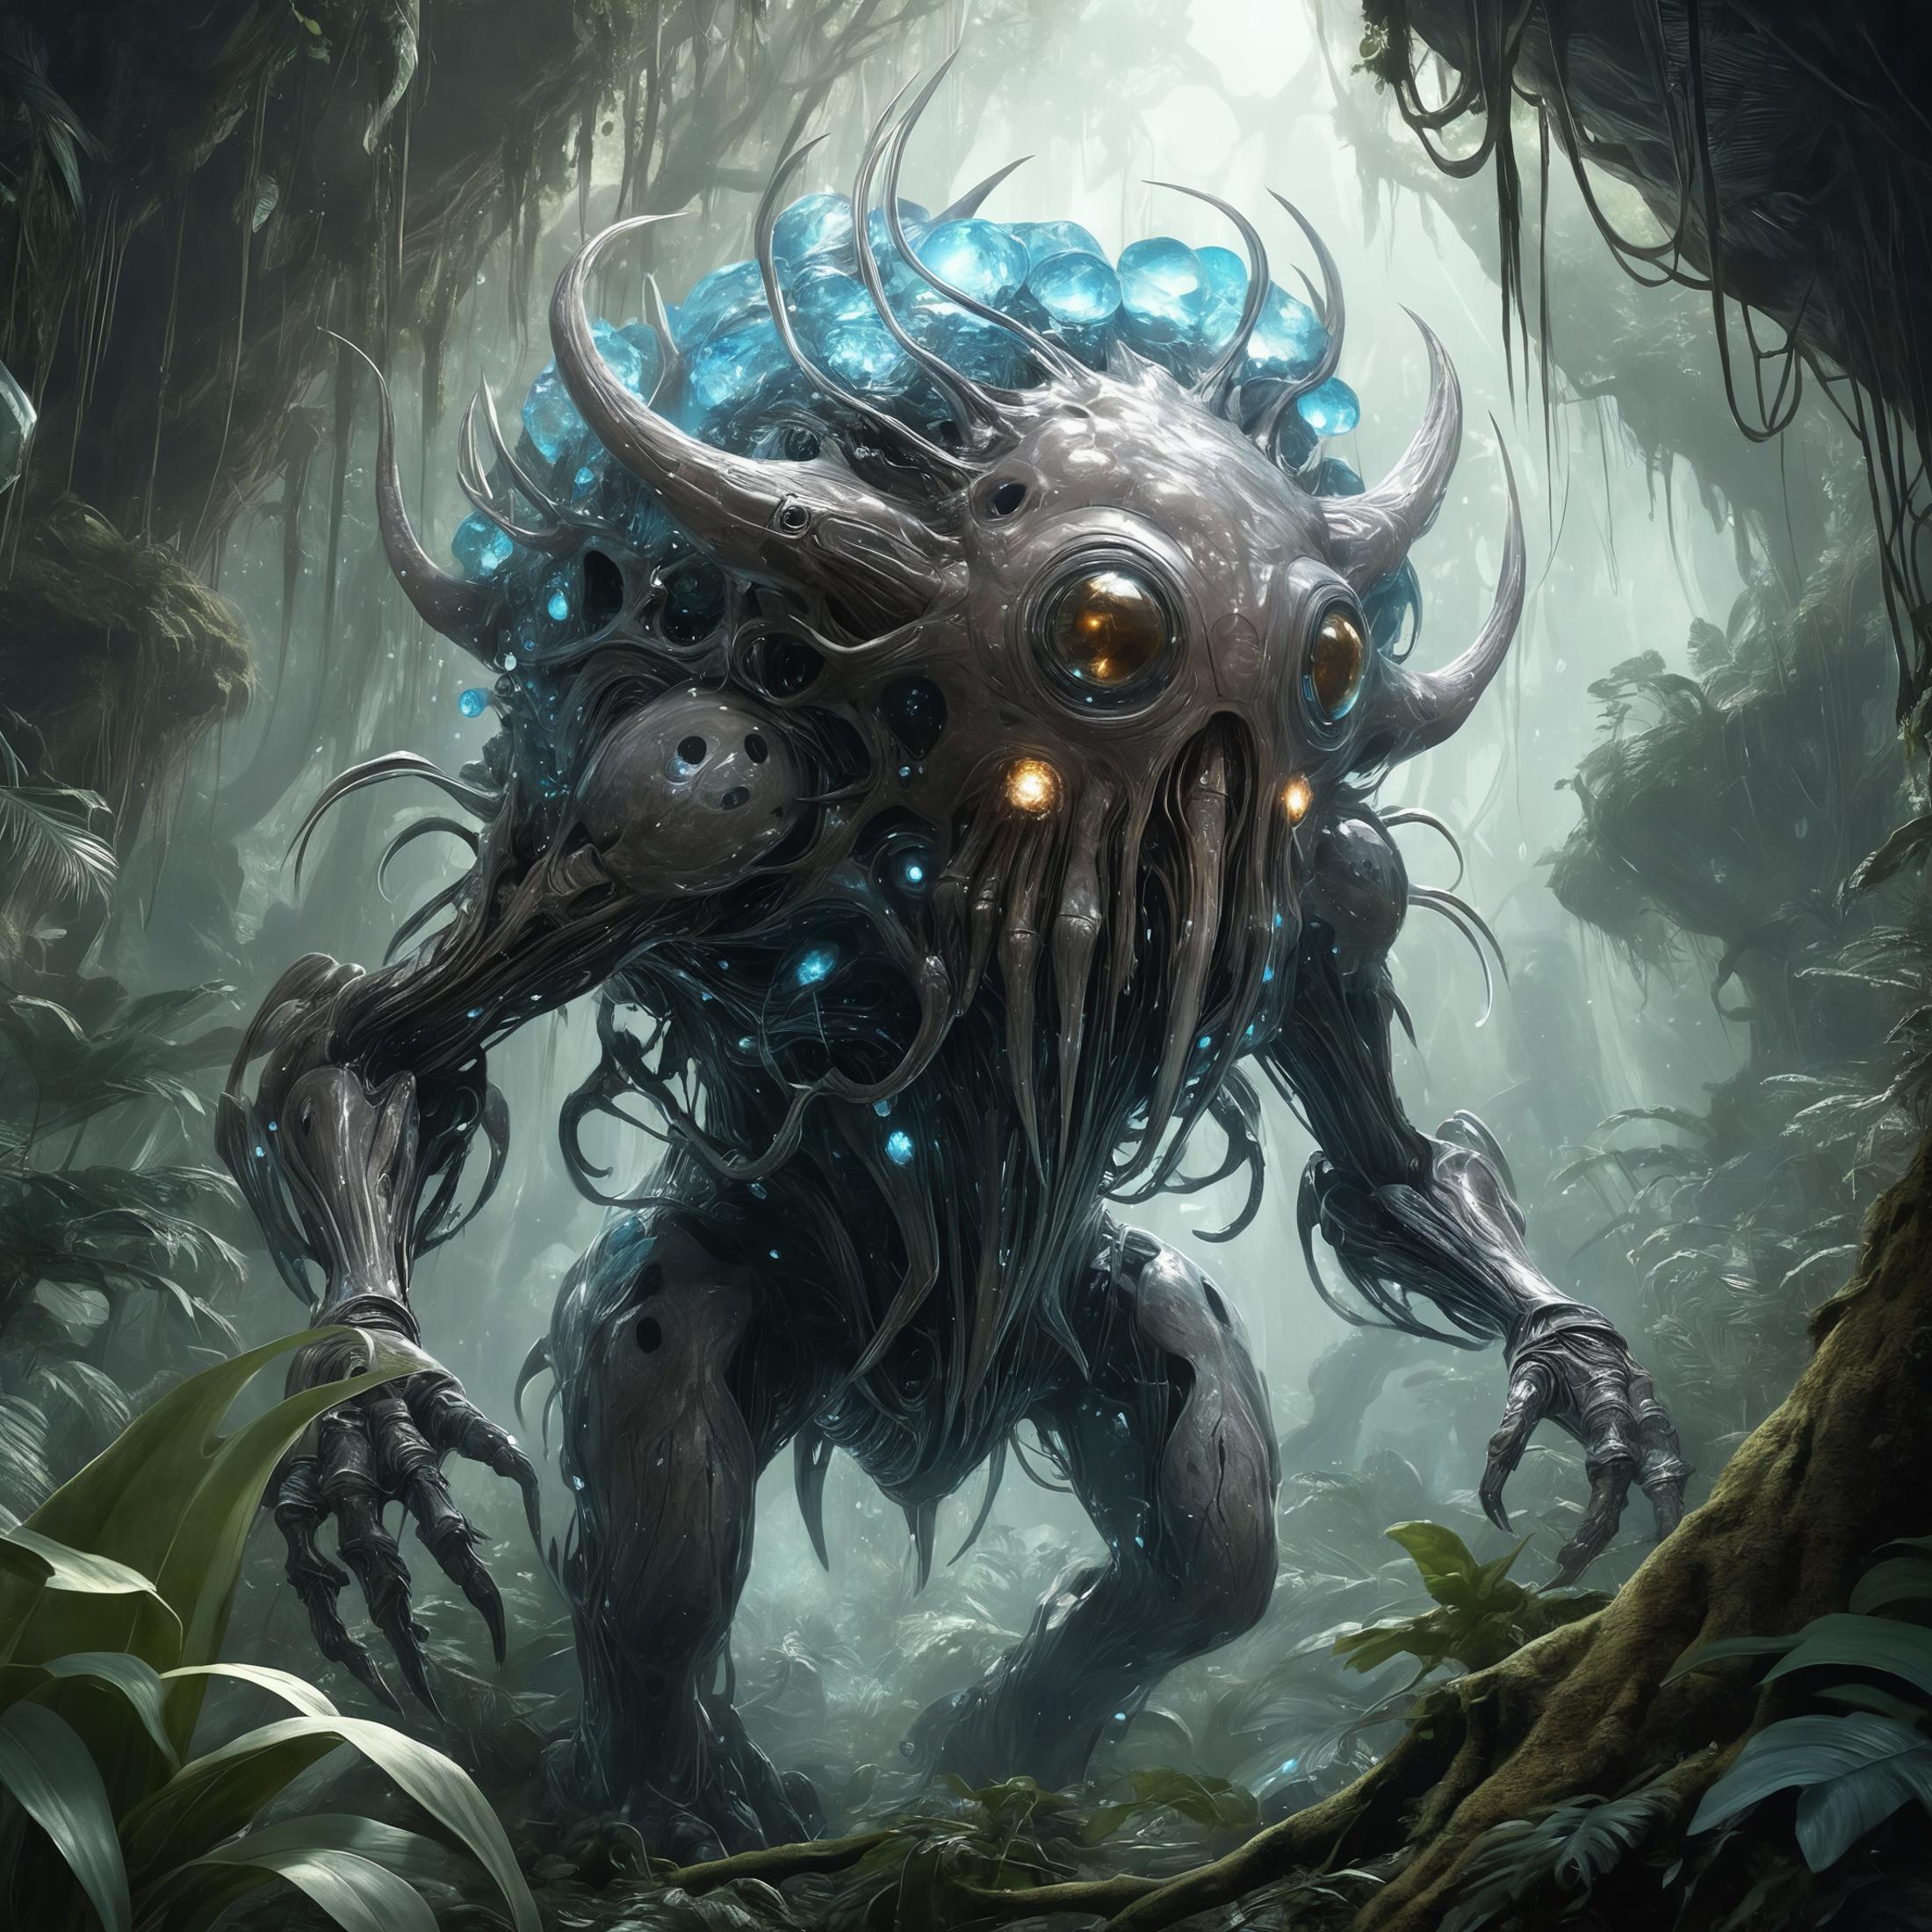 Ancient, Robotic Monster with Blue Orbs and Tentacles in a Jungle Environment